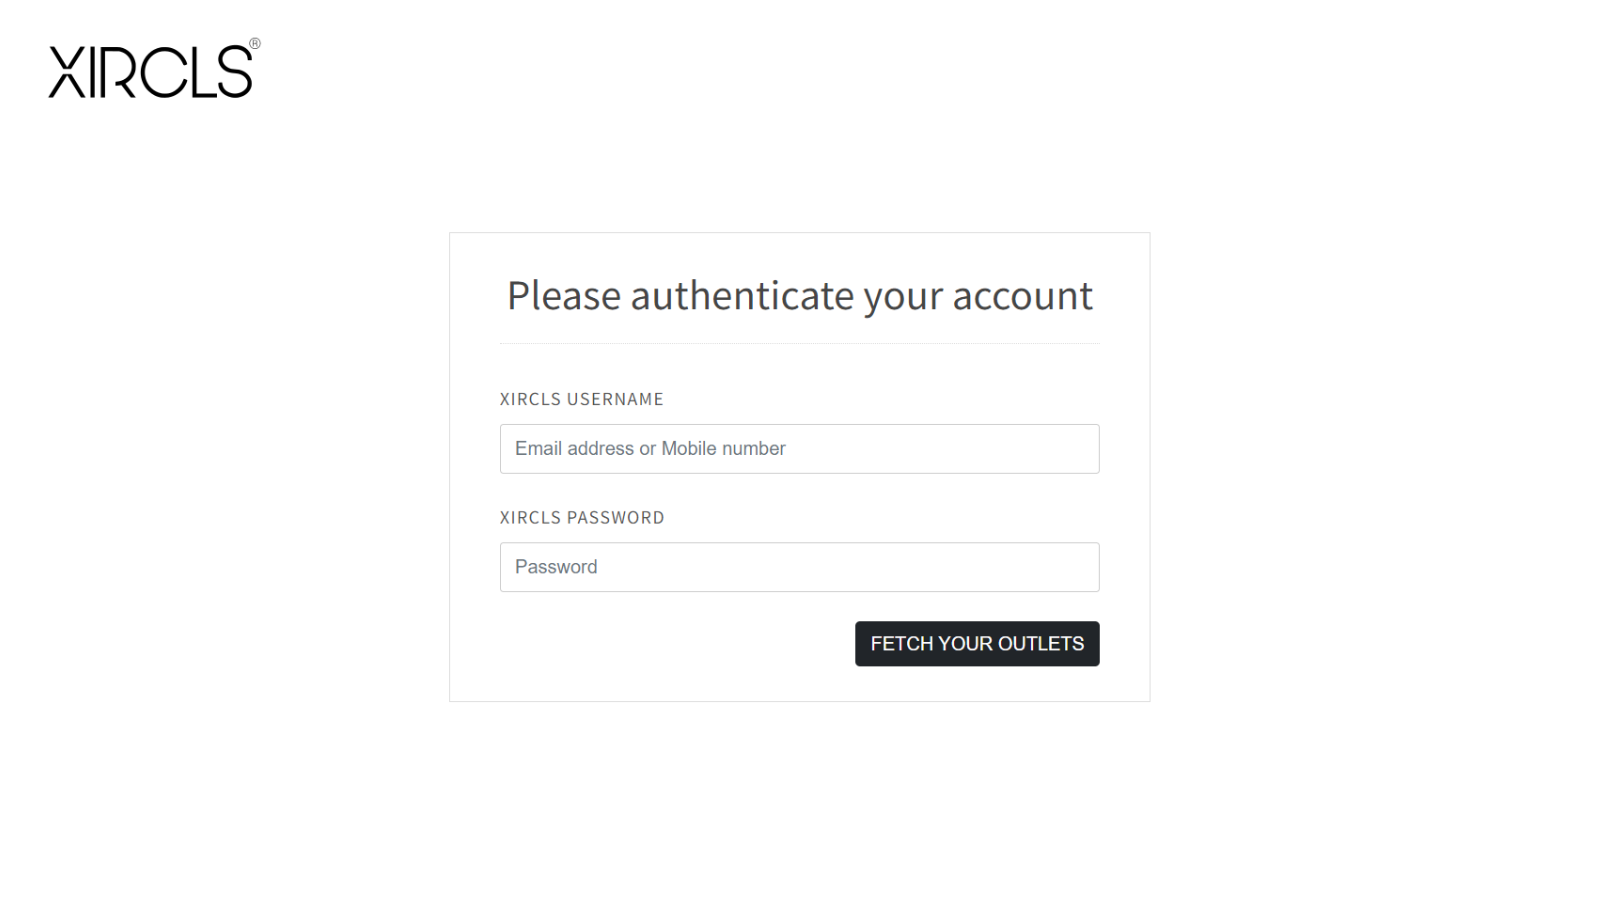 First page of app user interface i.e. store authentication page